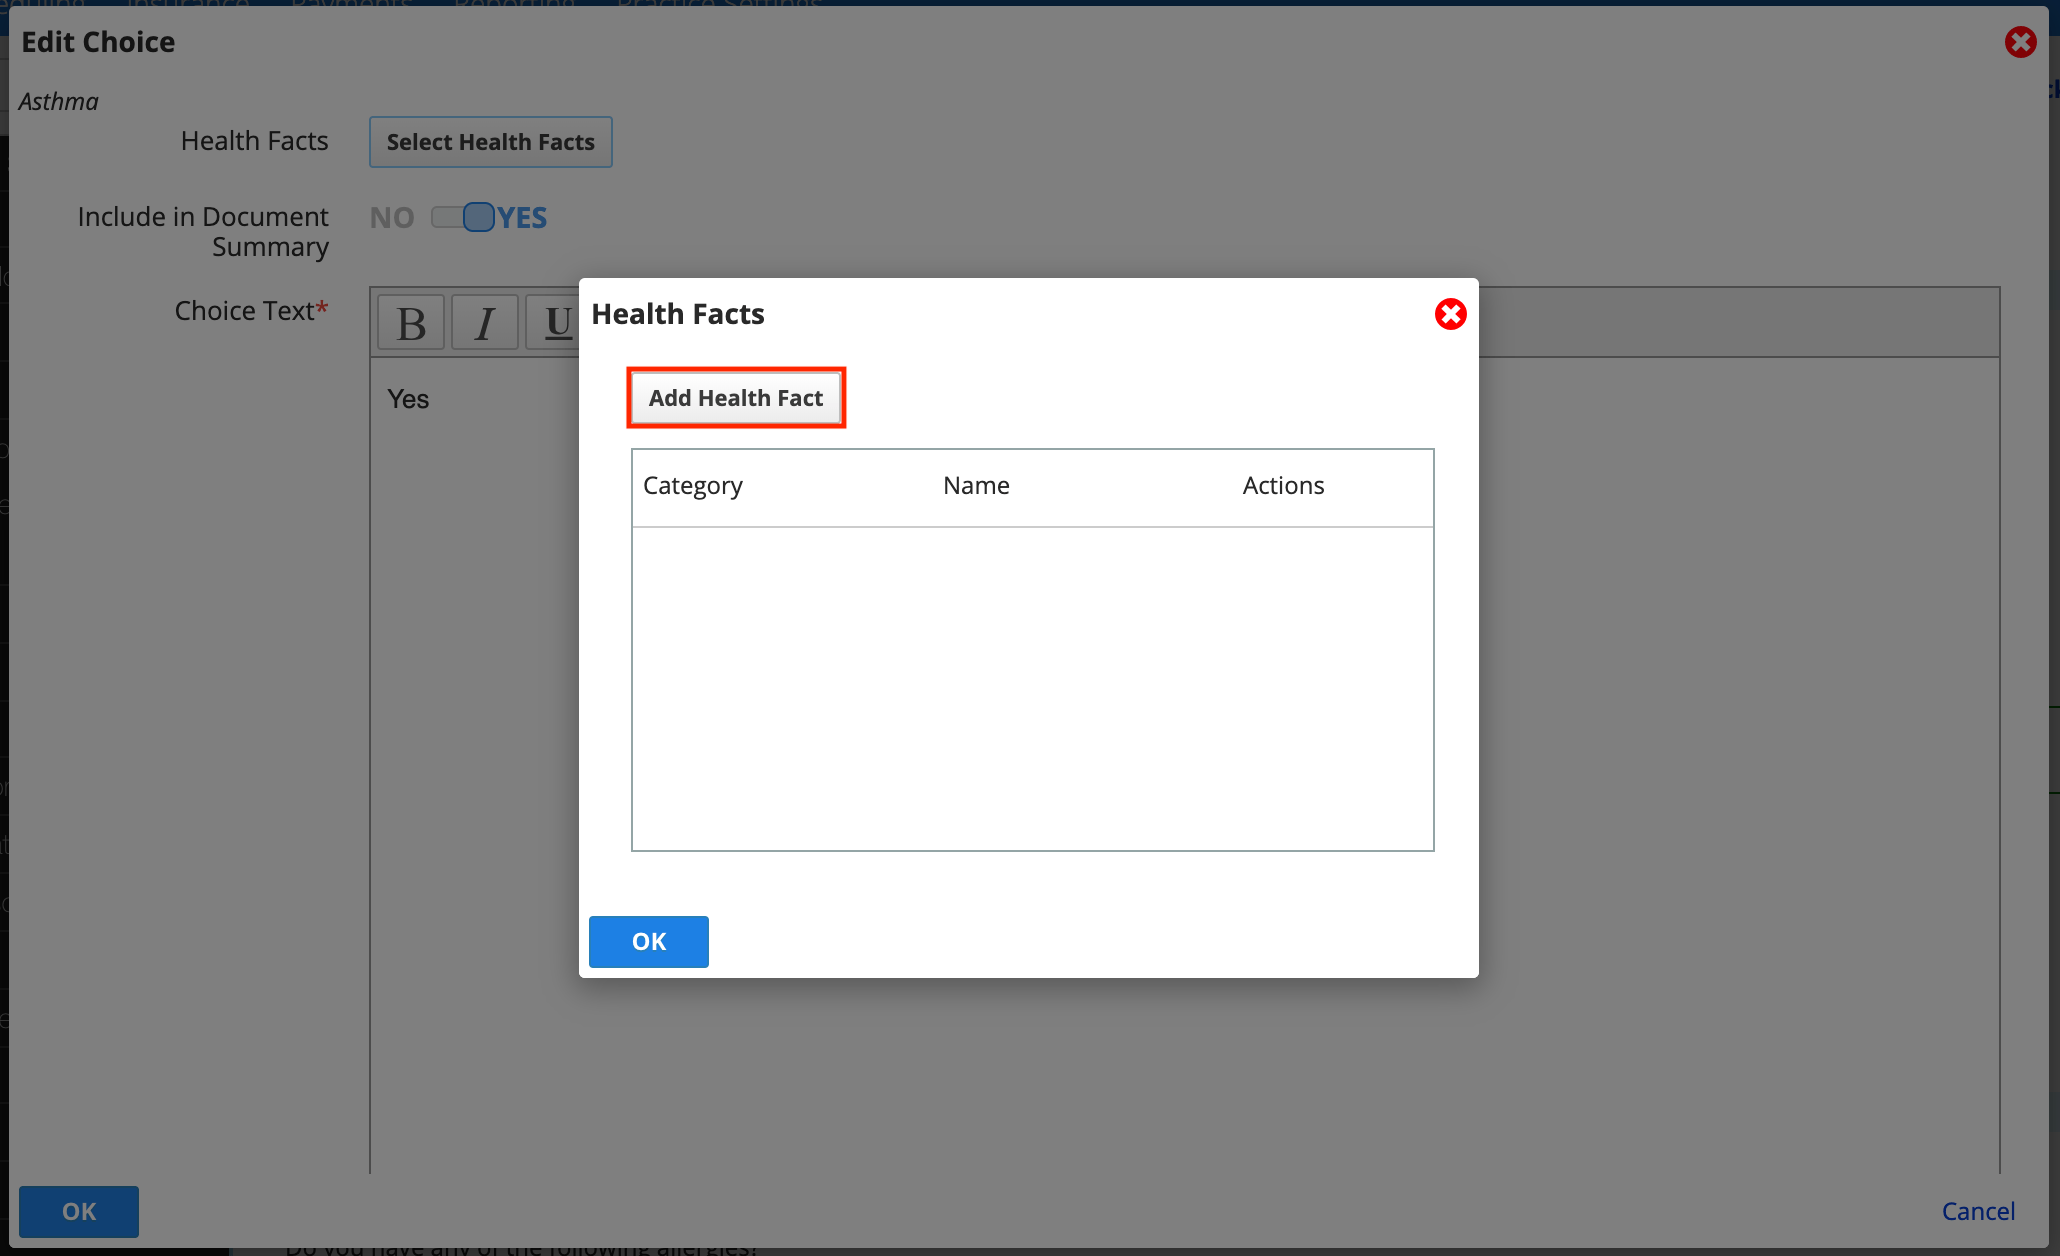 The add health fact button is in the top left corner of the dialog.